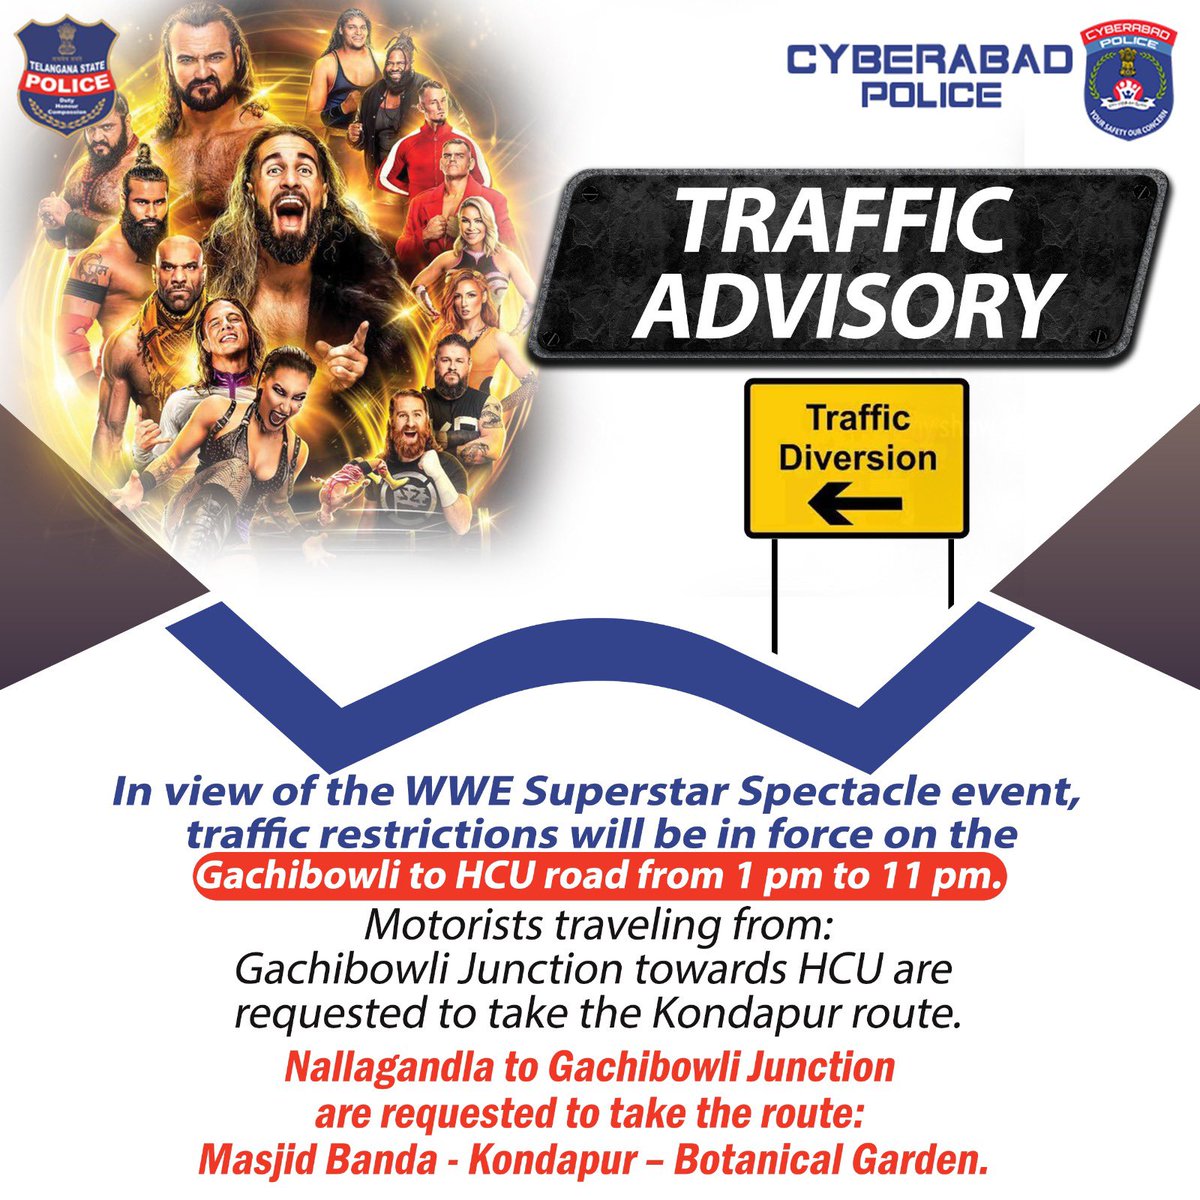 Temporary traffic restrictions on Gachibowli to HCU road for WWE Superstar Spectacle event from 1 pm to 11 pm. Use alternate routes for a smooth flow of traffic your cooperation is appreciated. #CyberabadPolice